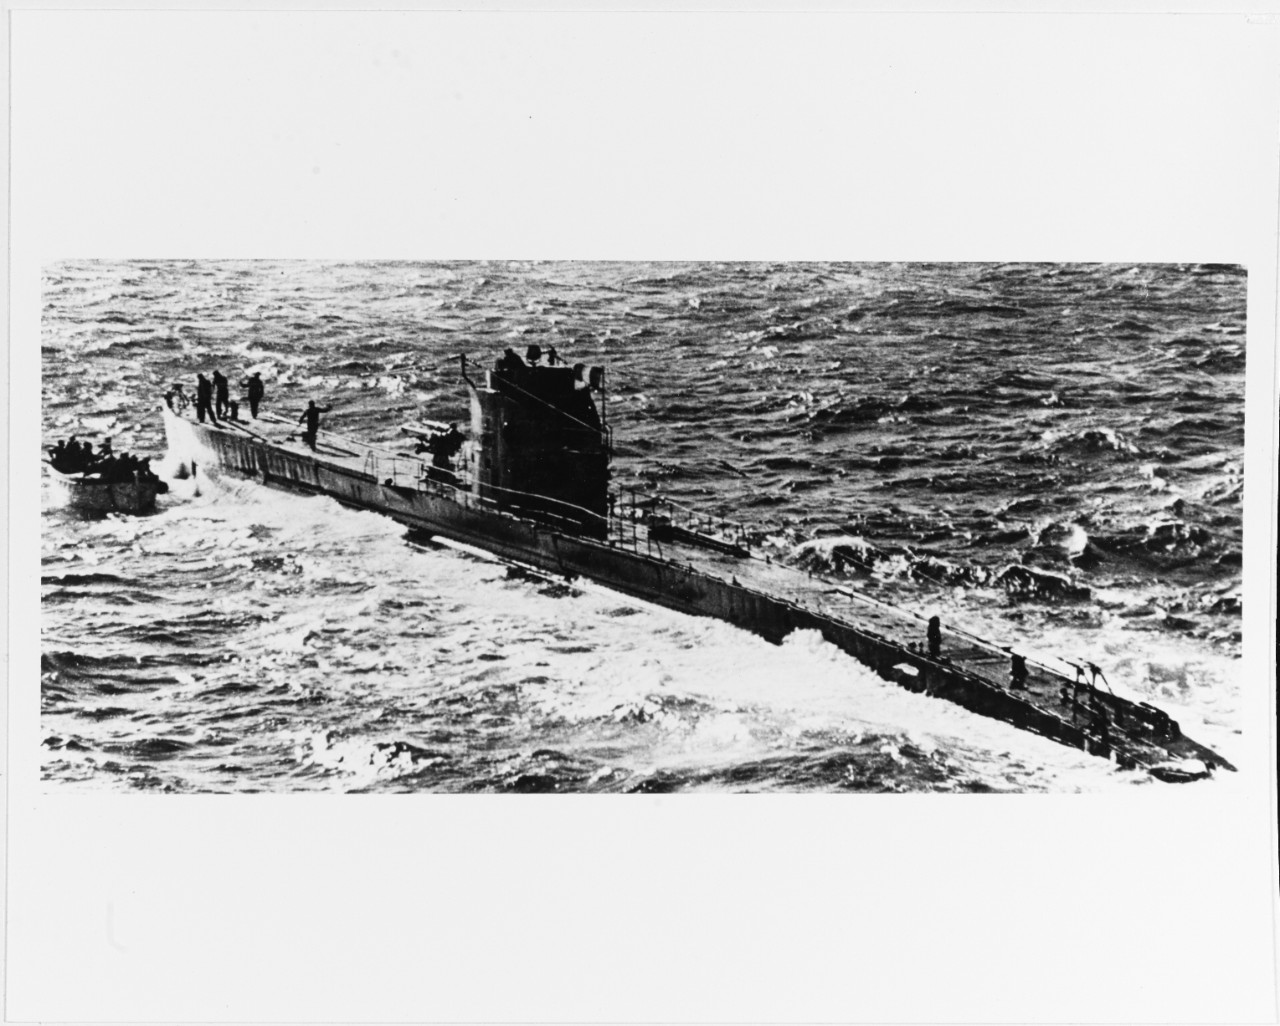 French Sequin class submarine